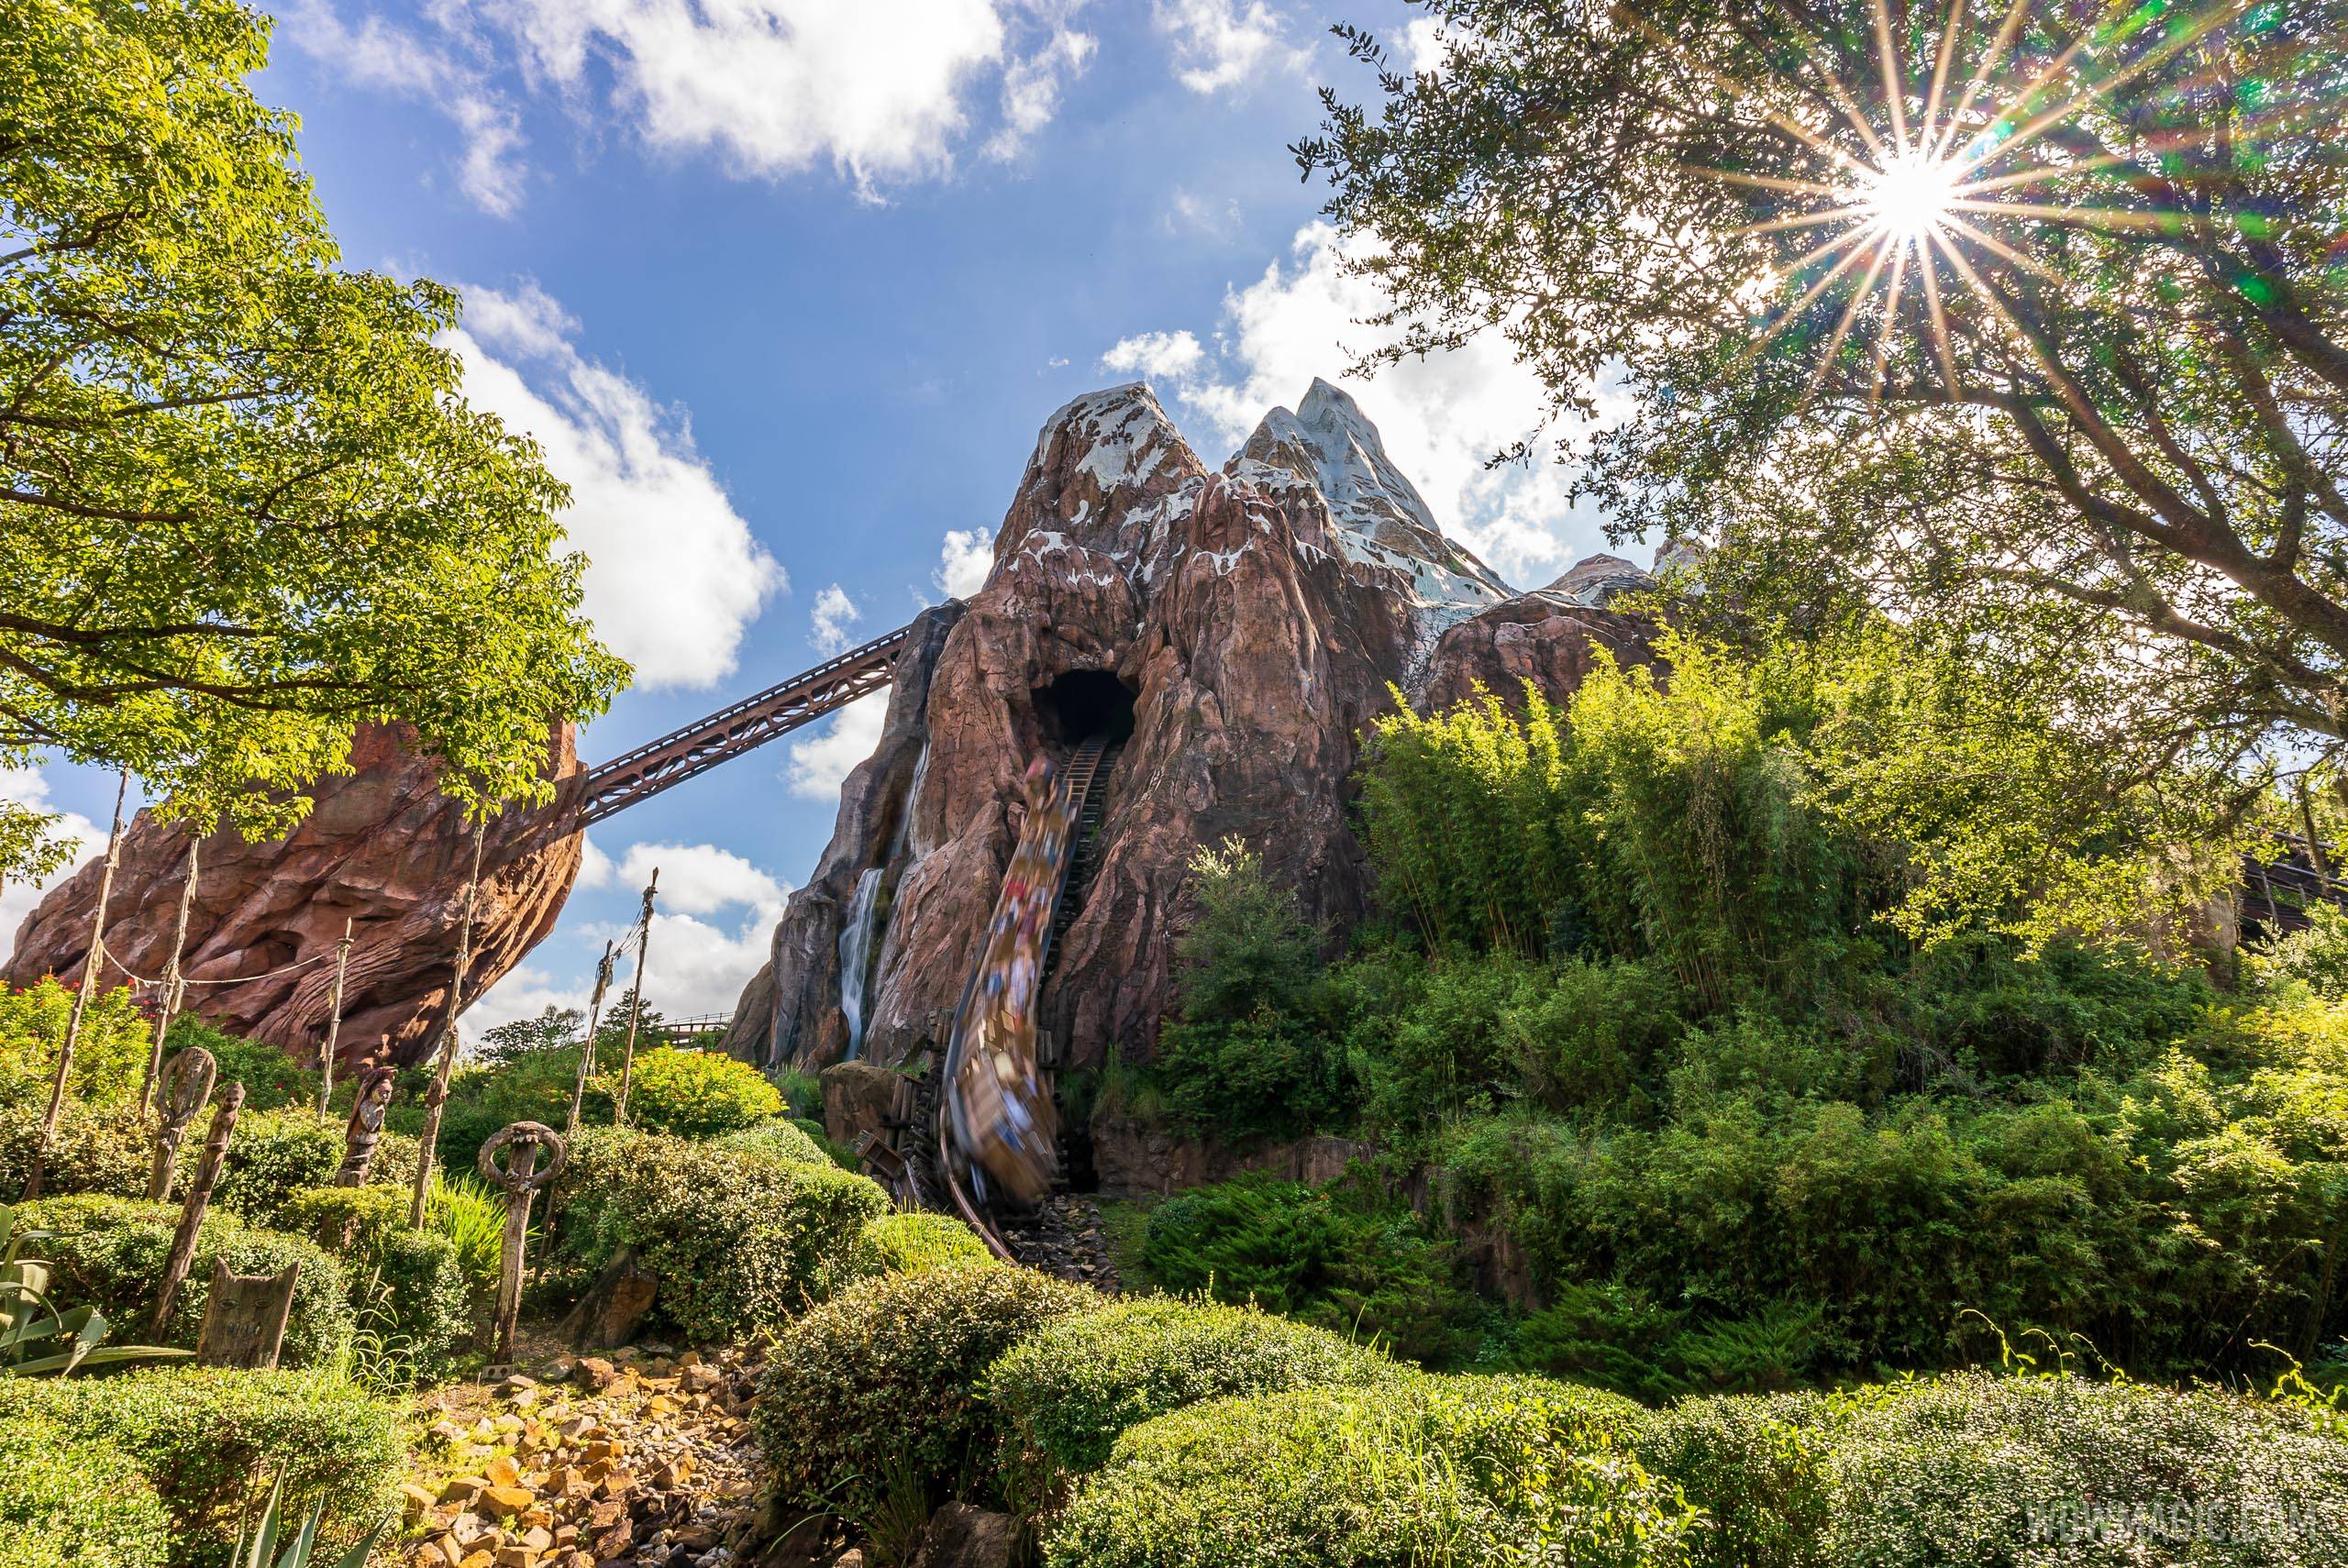 Animal Kingdom will open earlier than normal to compensate for the early close